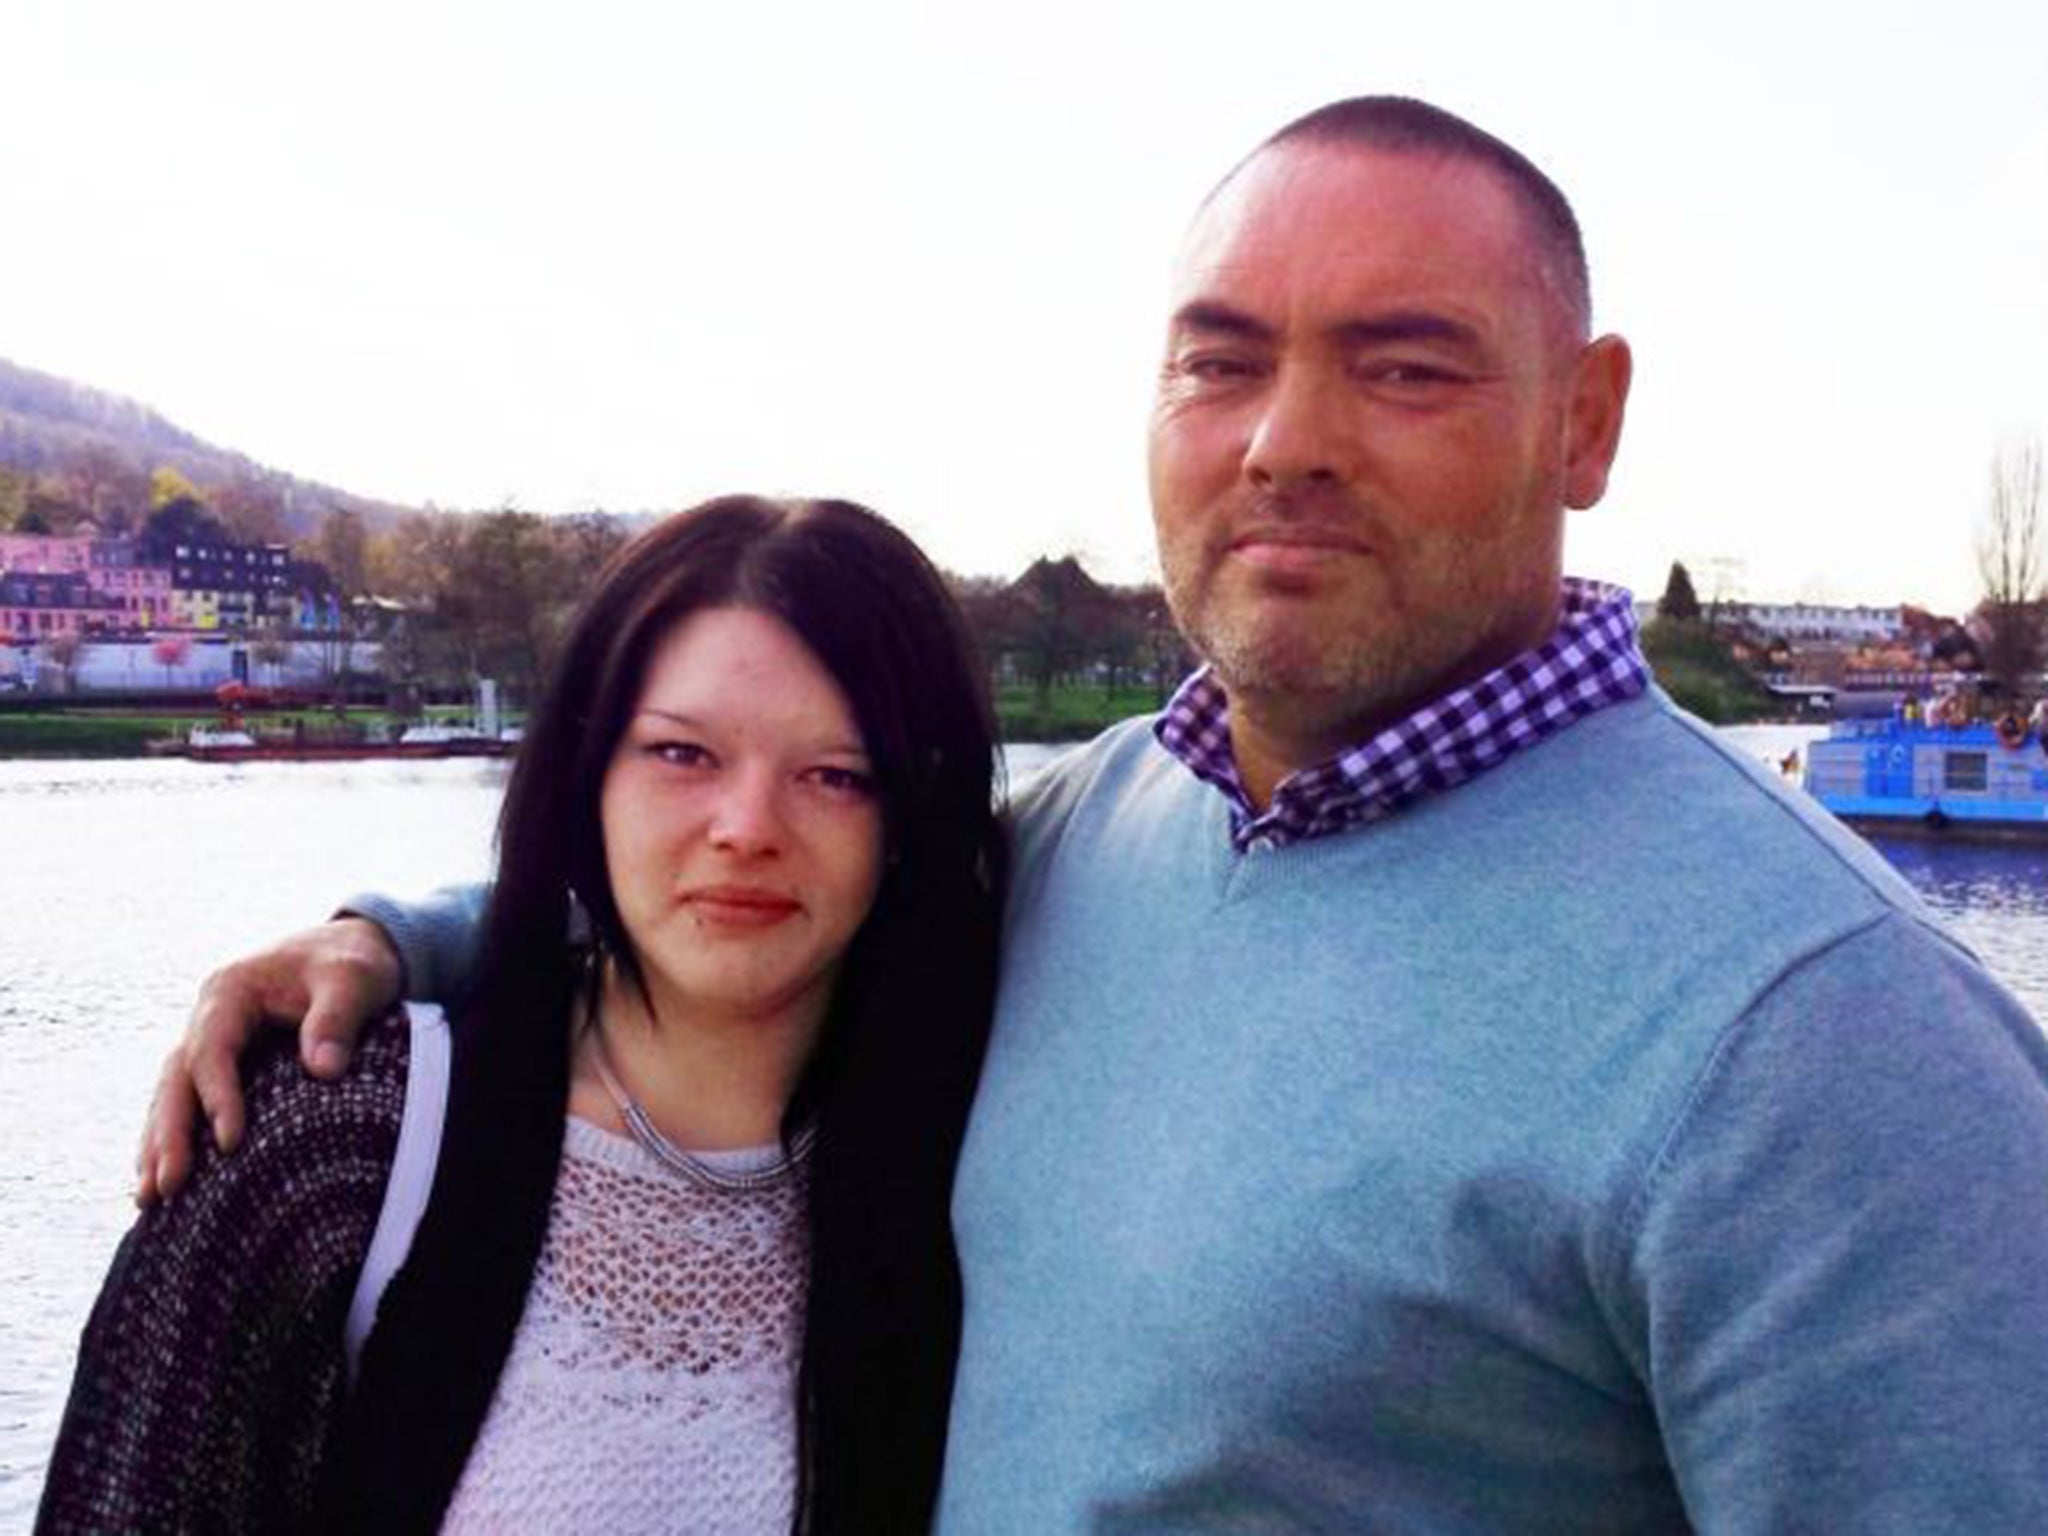 Better together: Paul Wright is reunited with his daughter, Karina, in ‘Long Lost Family’